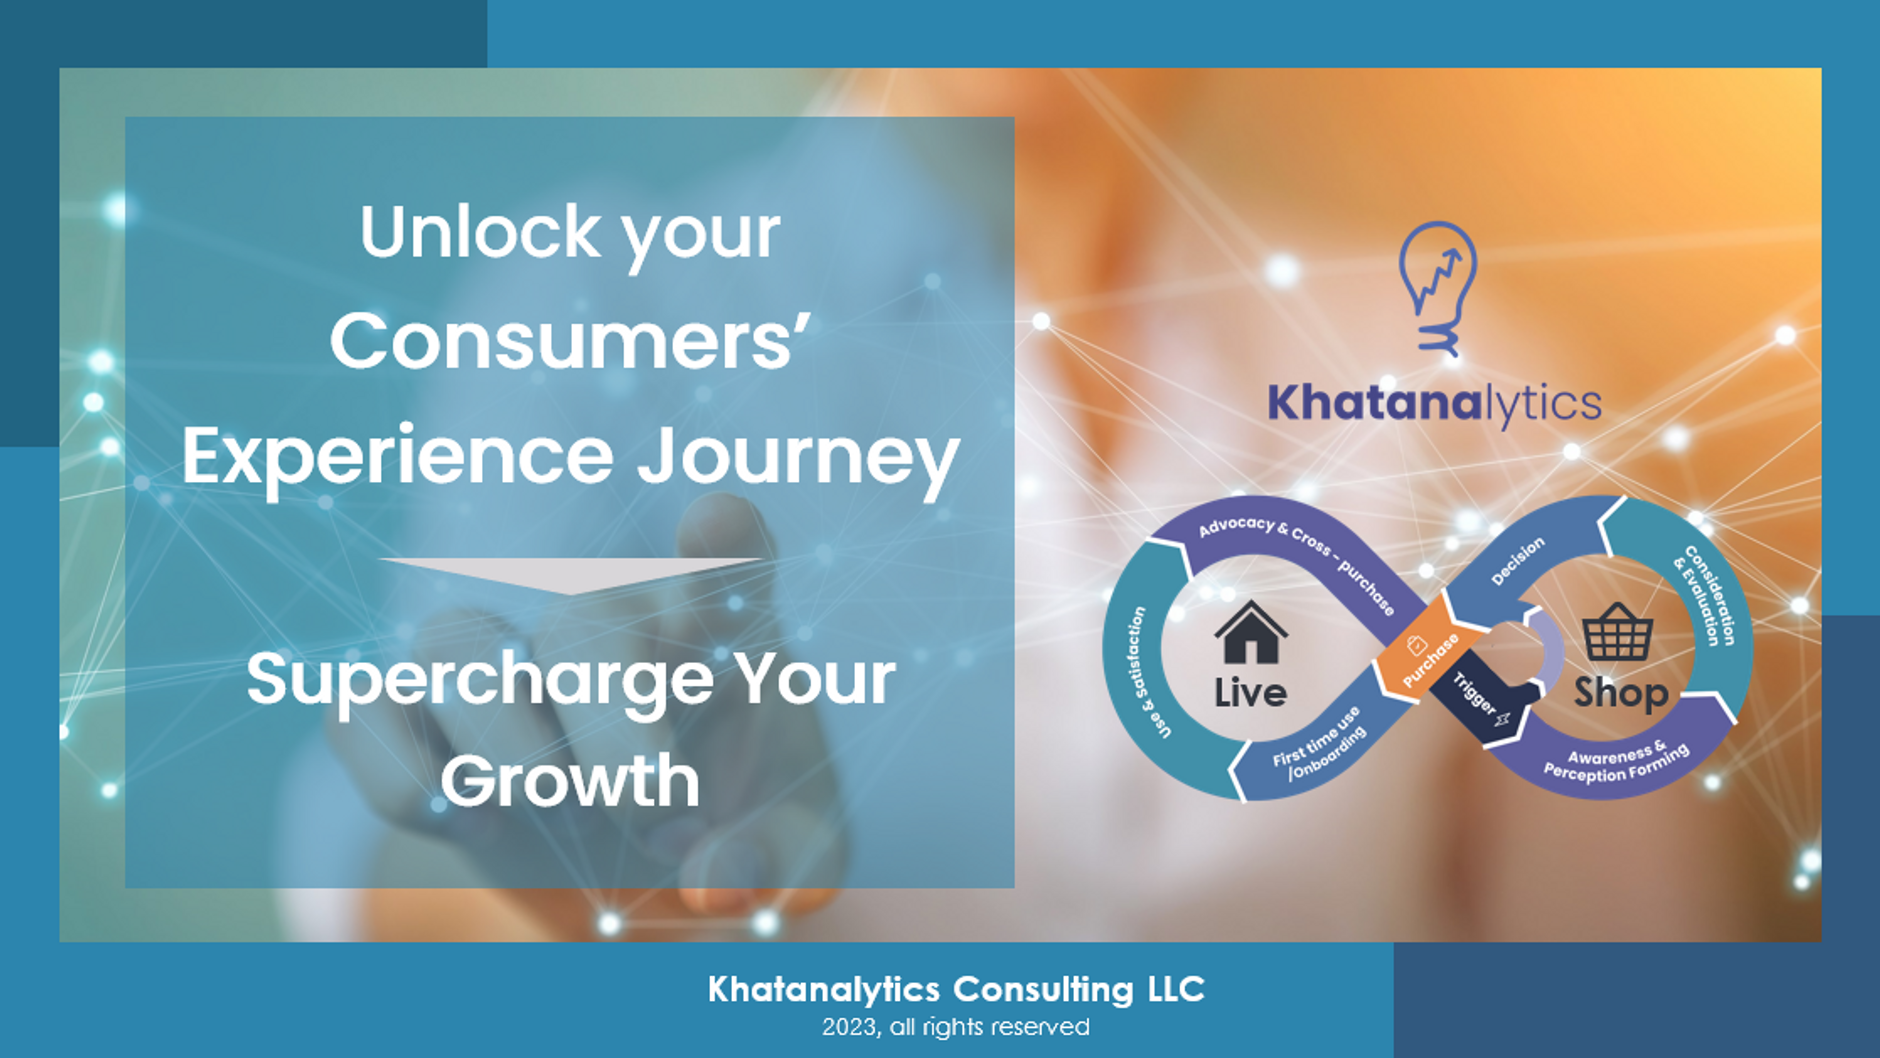 Supercharge Growth by Unlocking Consumers' Experience Journeys | Khatanalytics Consulting